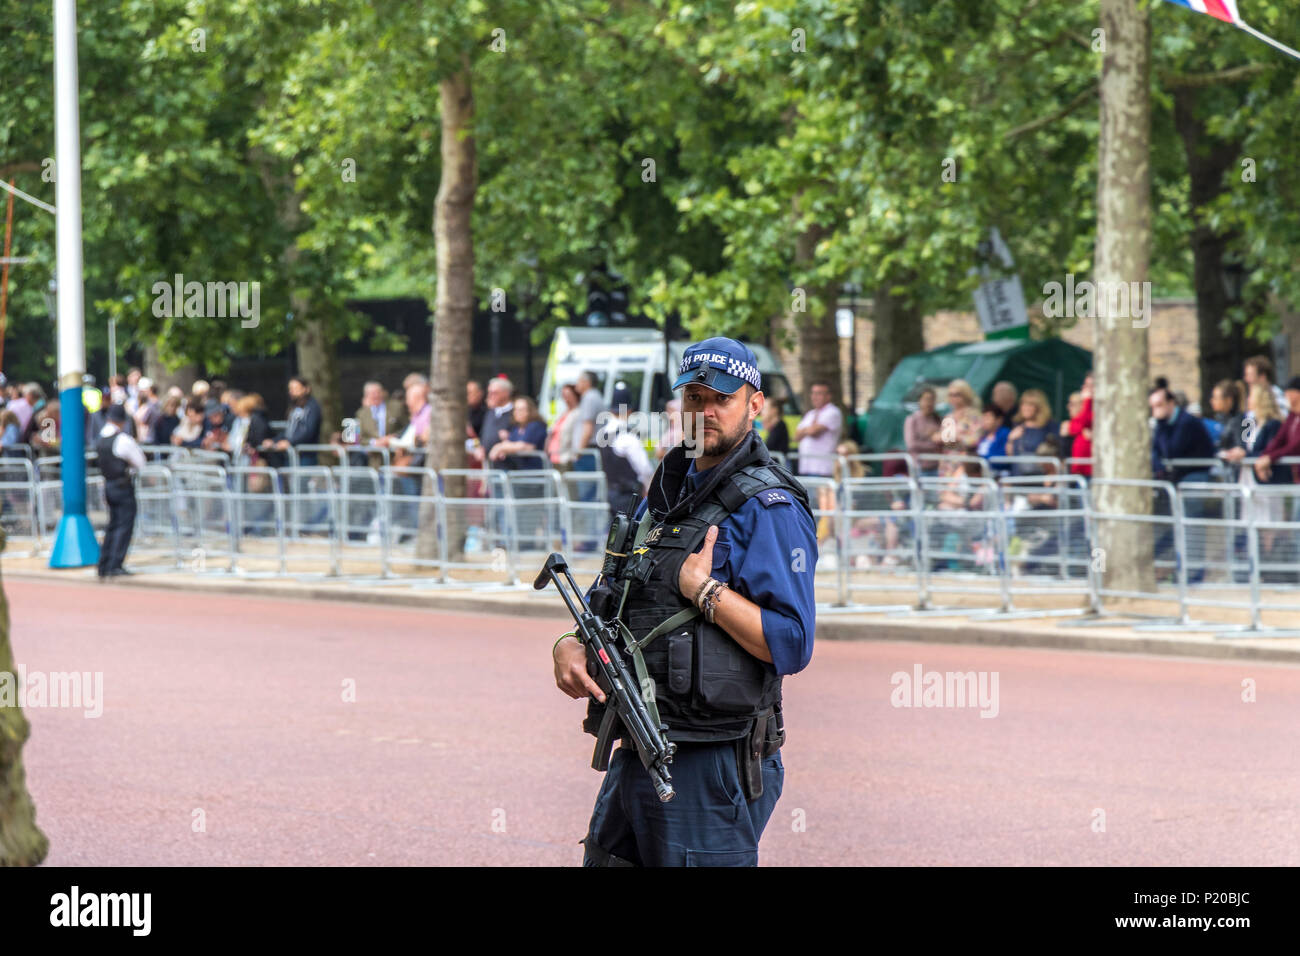 An armed Police officer of The Specialist Firearms Command SCO19 patrolling the crowds at The Trooping Of The Colour Ceremony, The Mall ,London 2018 Stock Photo